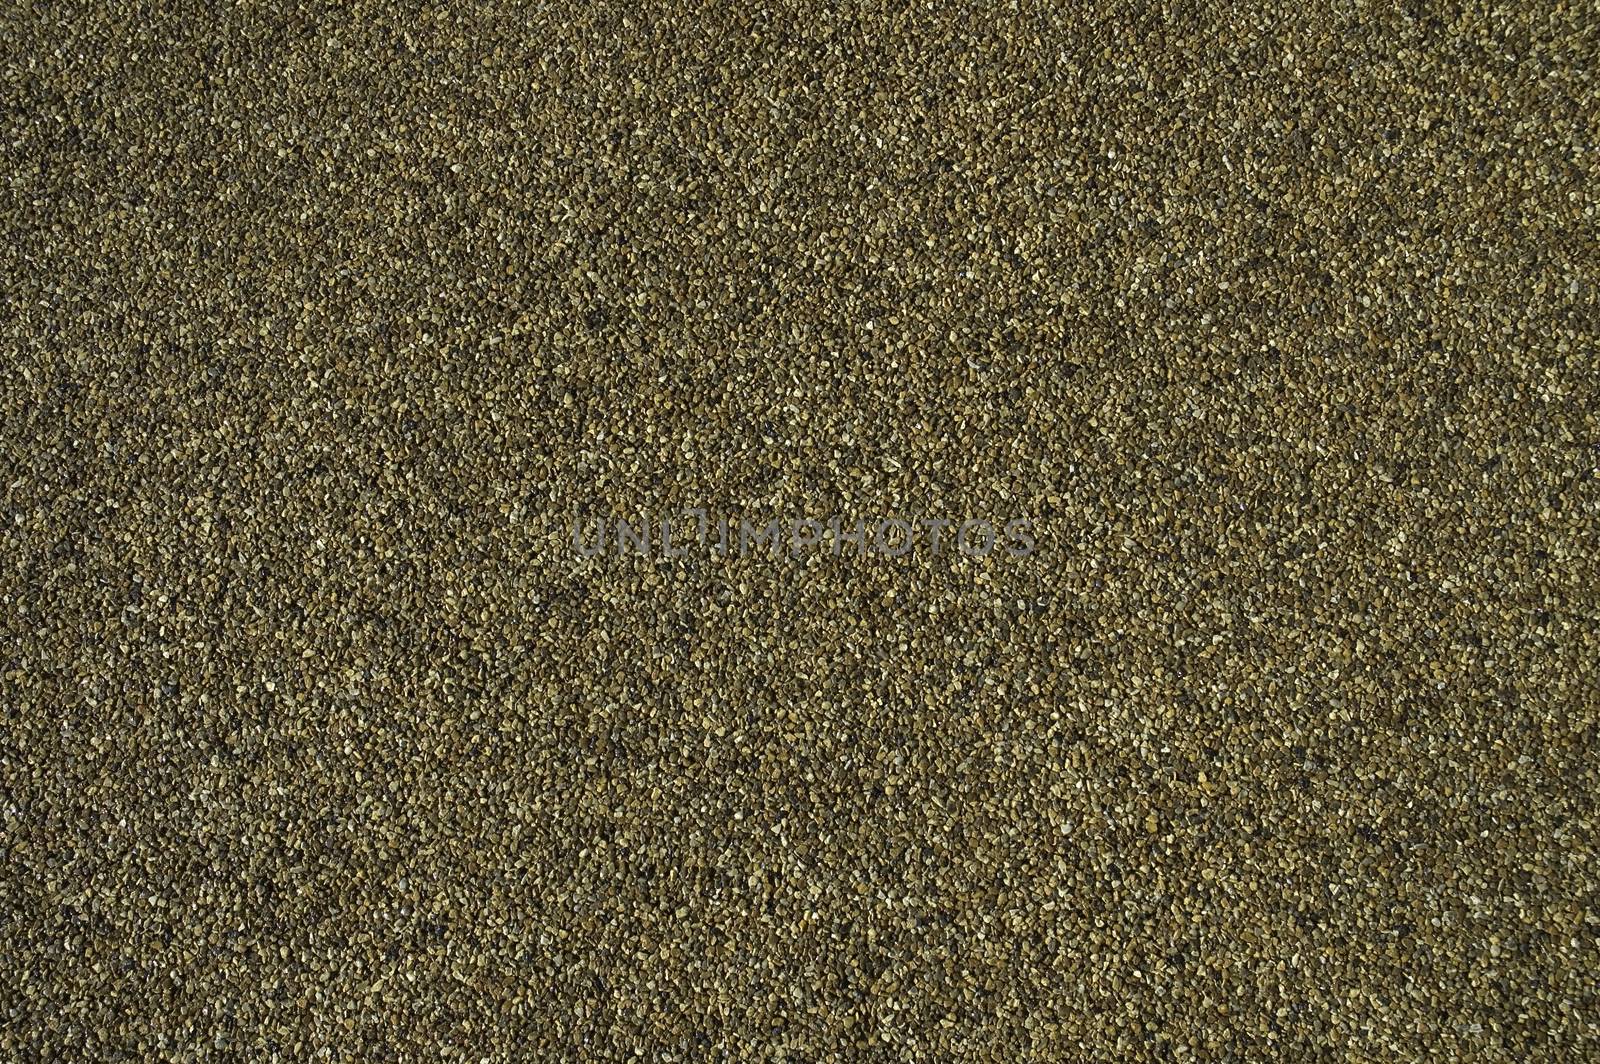 background of many tiny pieces of gravel